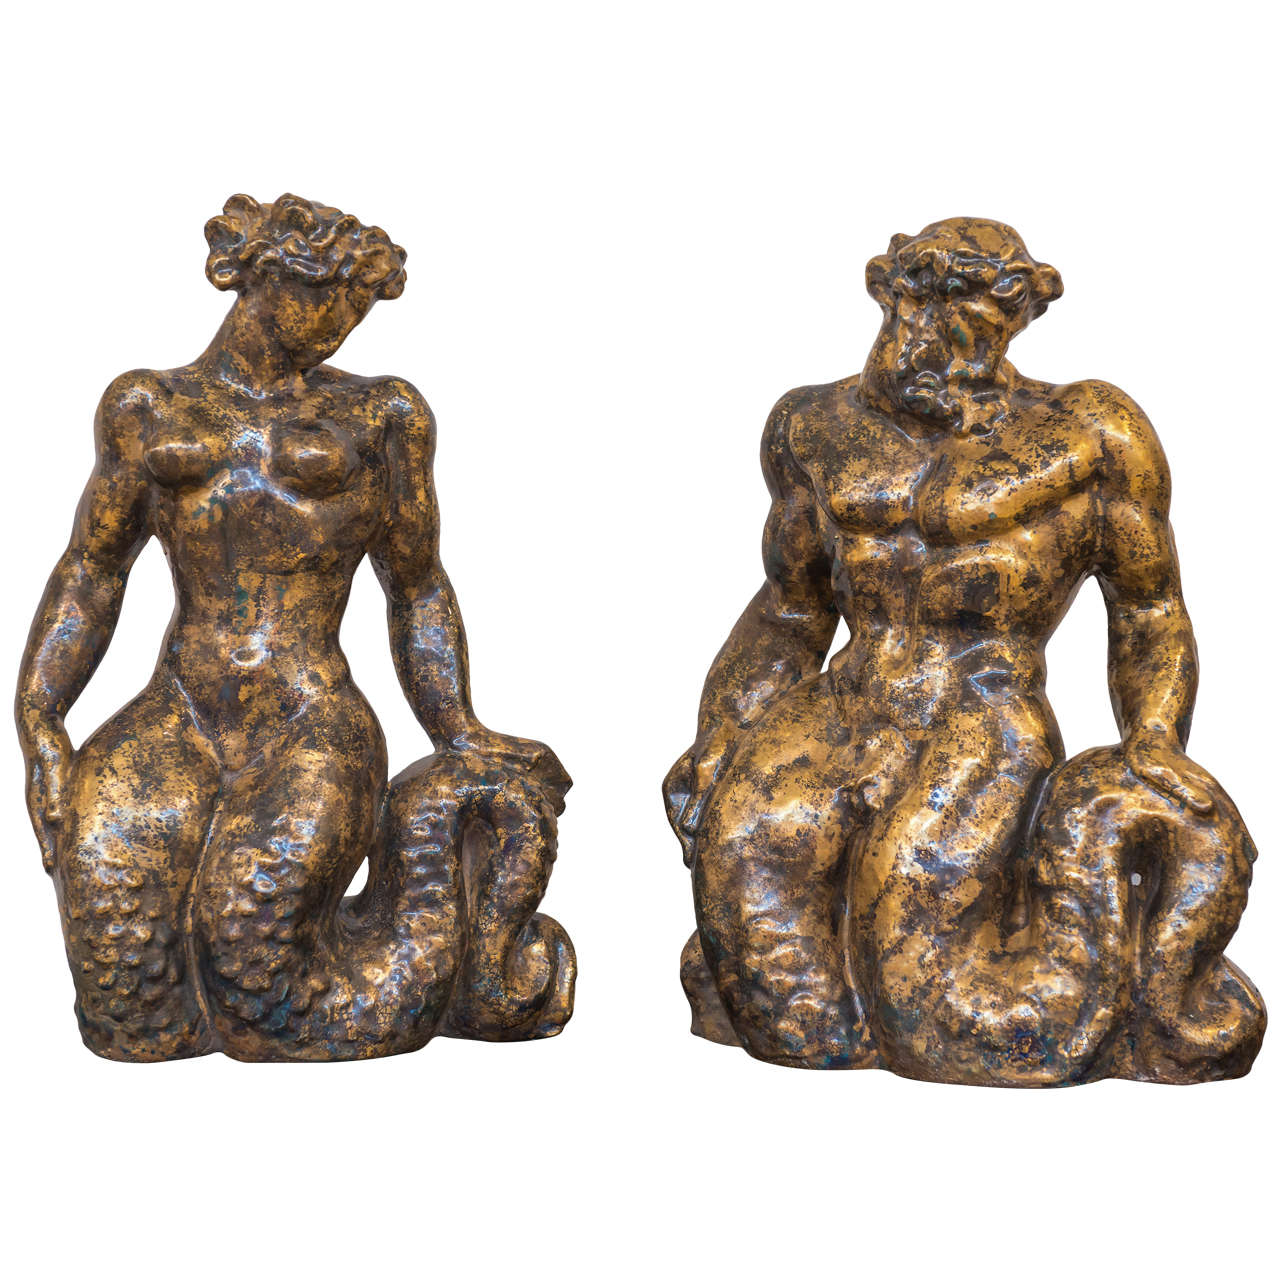 Jean MAYODON - Exceptional Pair of Ceramic Sculptures For Sale